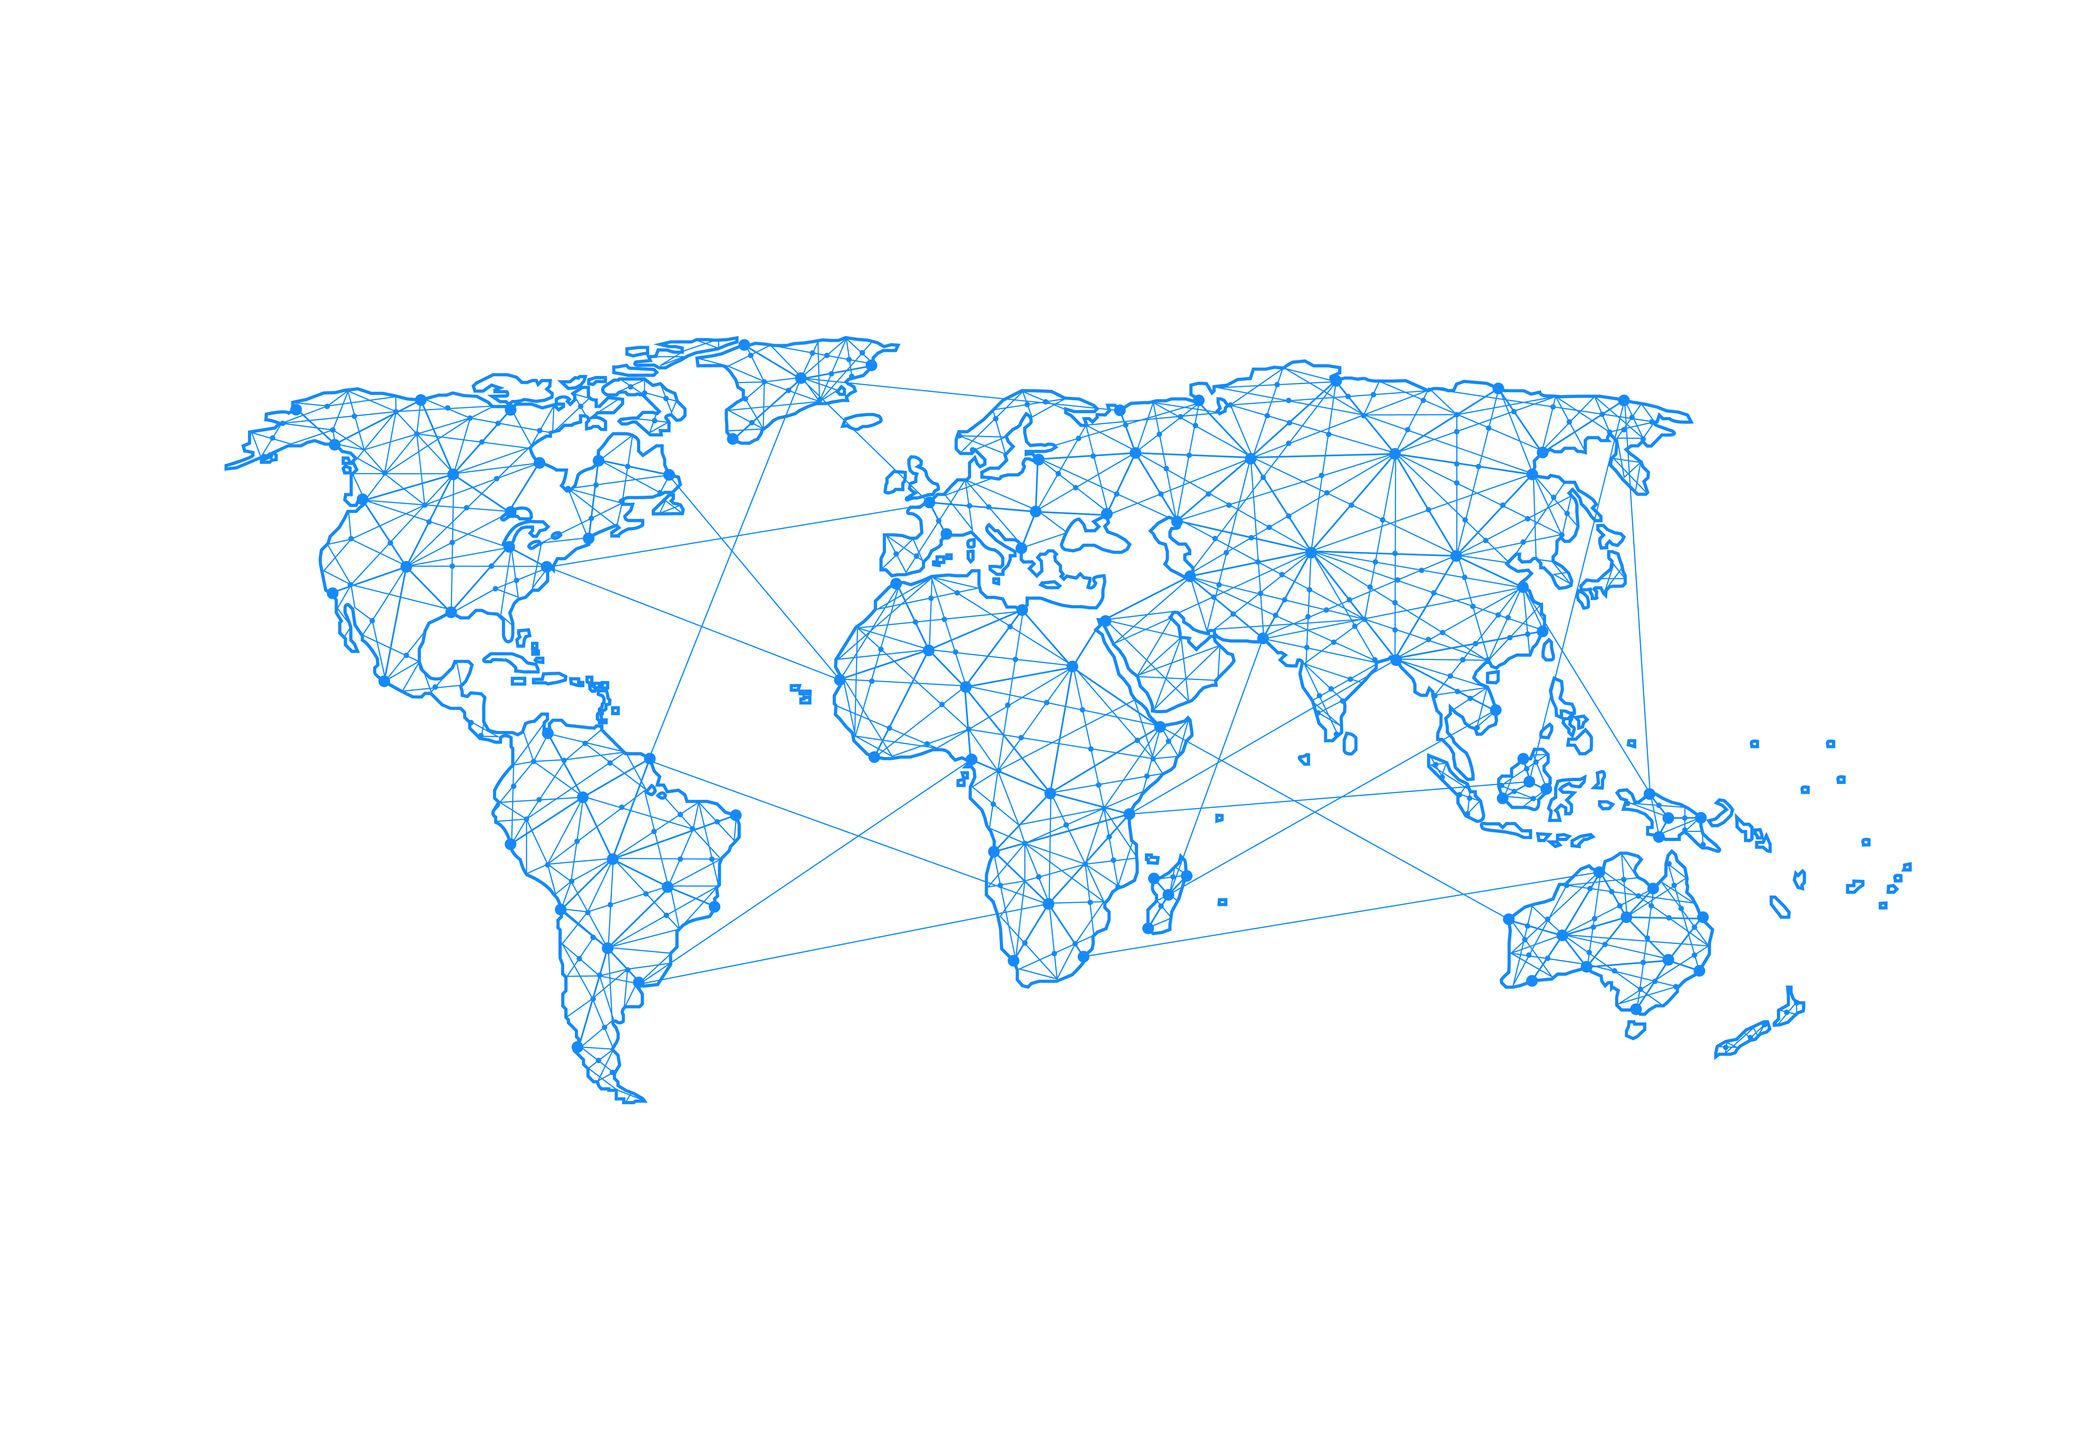 Global network connection. World map point and line composition concept of global business. Vector Illustration